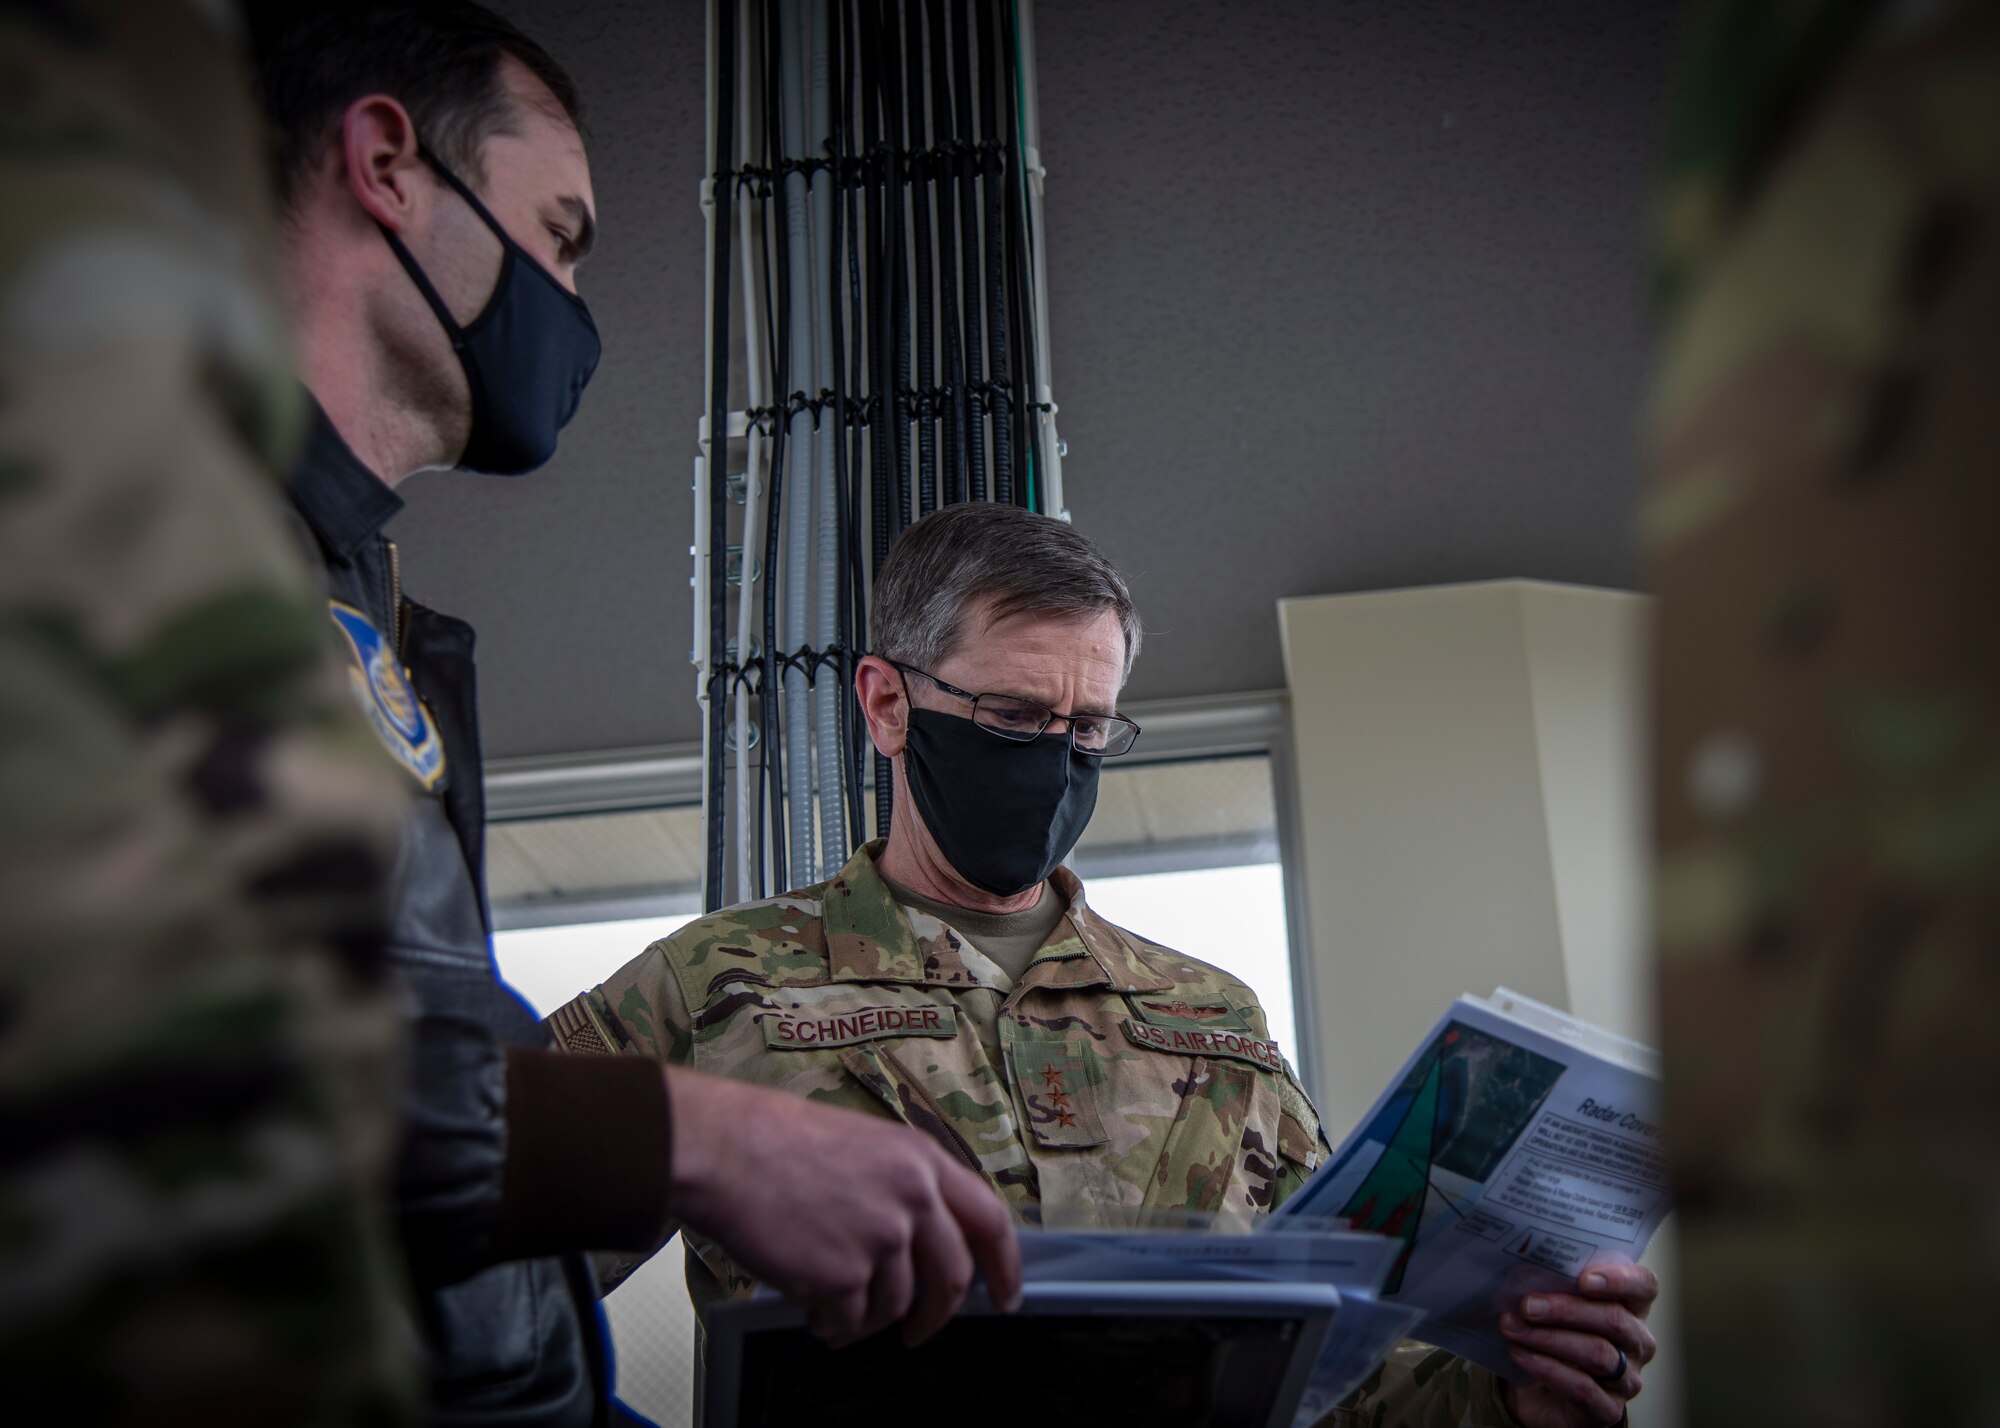 U.S. Air Force Maj. Daniel House, left, the 35th Operations Support Squadron assistant director of operations, talks to Lt. Gen. Kevin B. Schneider, right, the U.S. Forces Japan and Fifth Air Force commander, at Draughon Range near Misawa Air Base, Japan, May 20, 2020. Draughon Range is the premier air-to-ground training site located in Japan, focusing on suppression of enemy air defense air operations. Members of the 35th Fighter Wing and other units throughout the Western Pacific train at the range to focus on SEAD and munition employment, combat search and rescue, and survival, evasion, resistance, and escape, ultimately enhancing the readiness and lethality of U.S. forces in this region. (U.S. Air Force photo by Airman 1st Class China M. Shock)